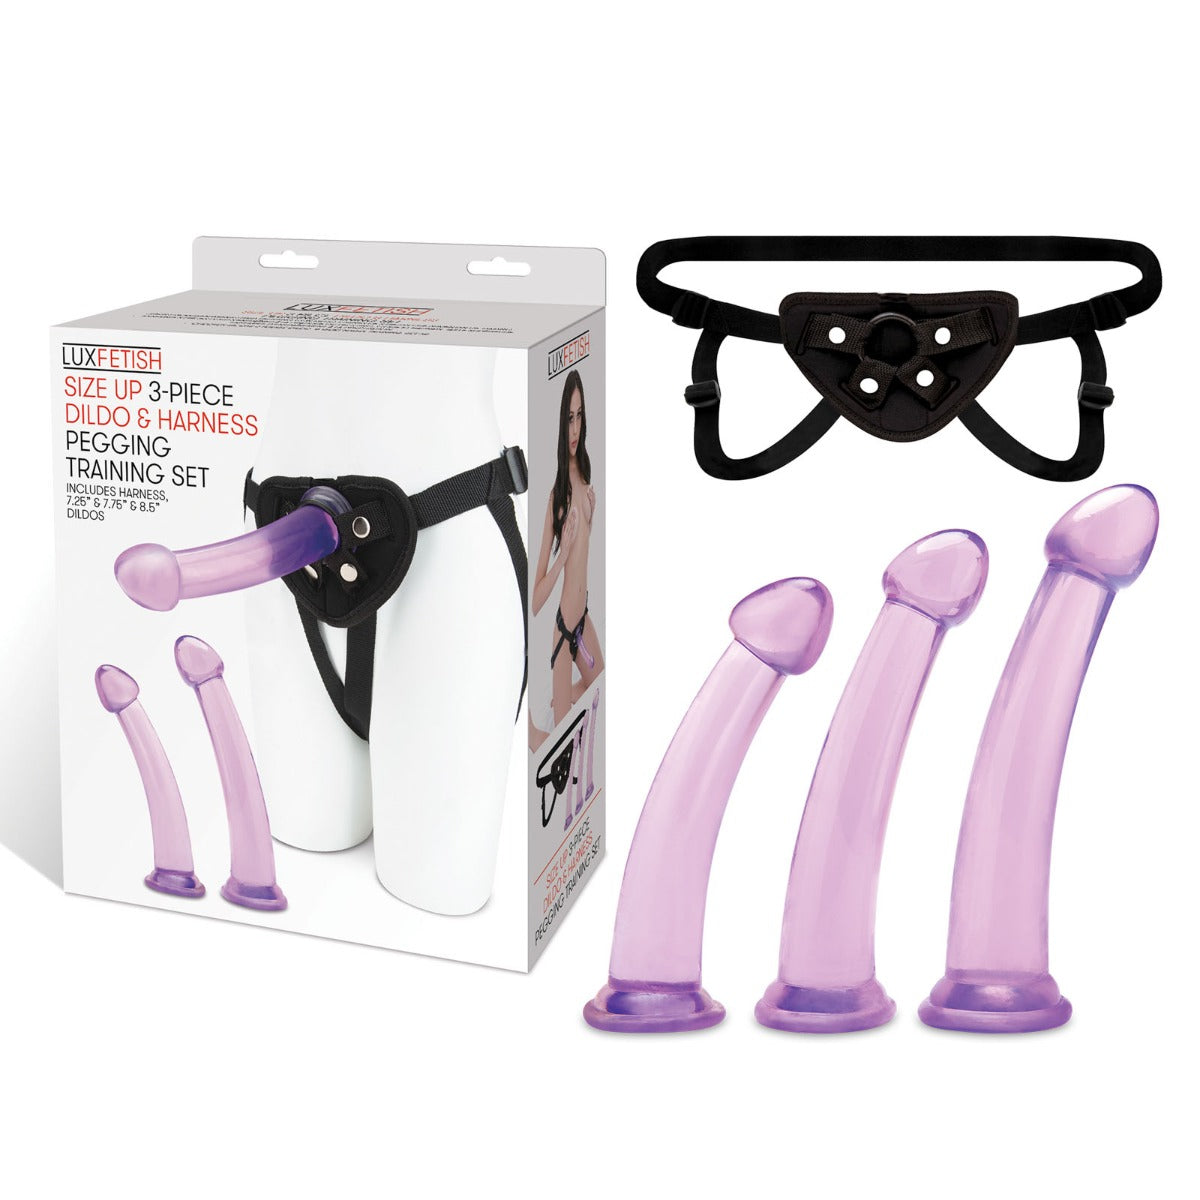 Strap On Harness SIZE UP 4-PIECE DILDO AND HARNESS PEGGING TRAINING SET   